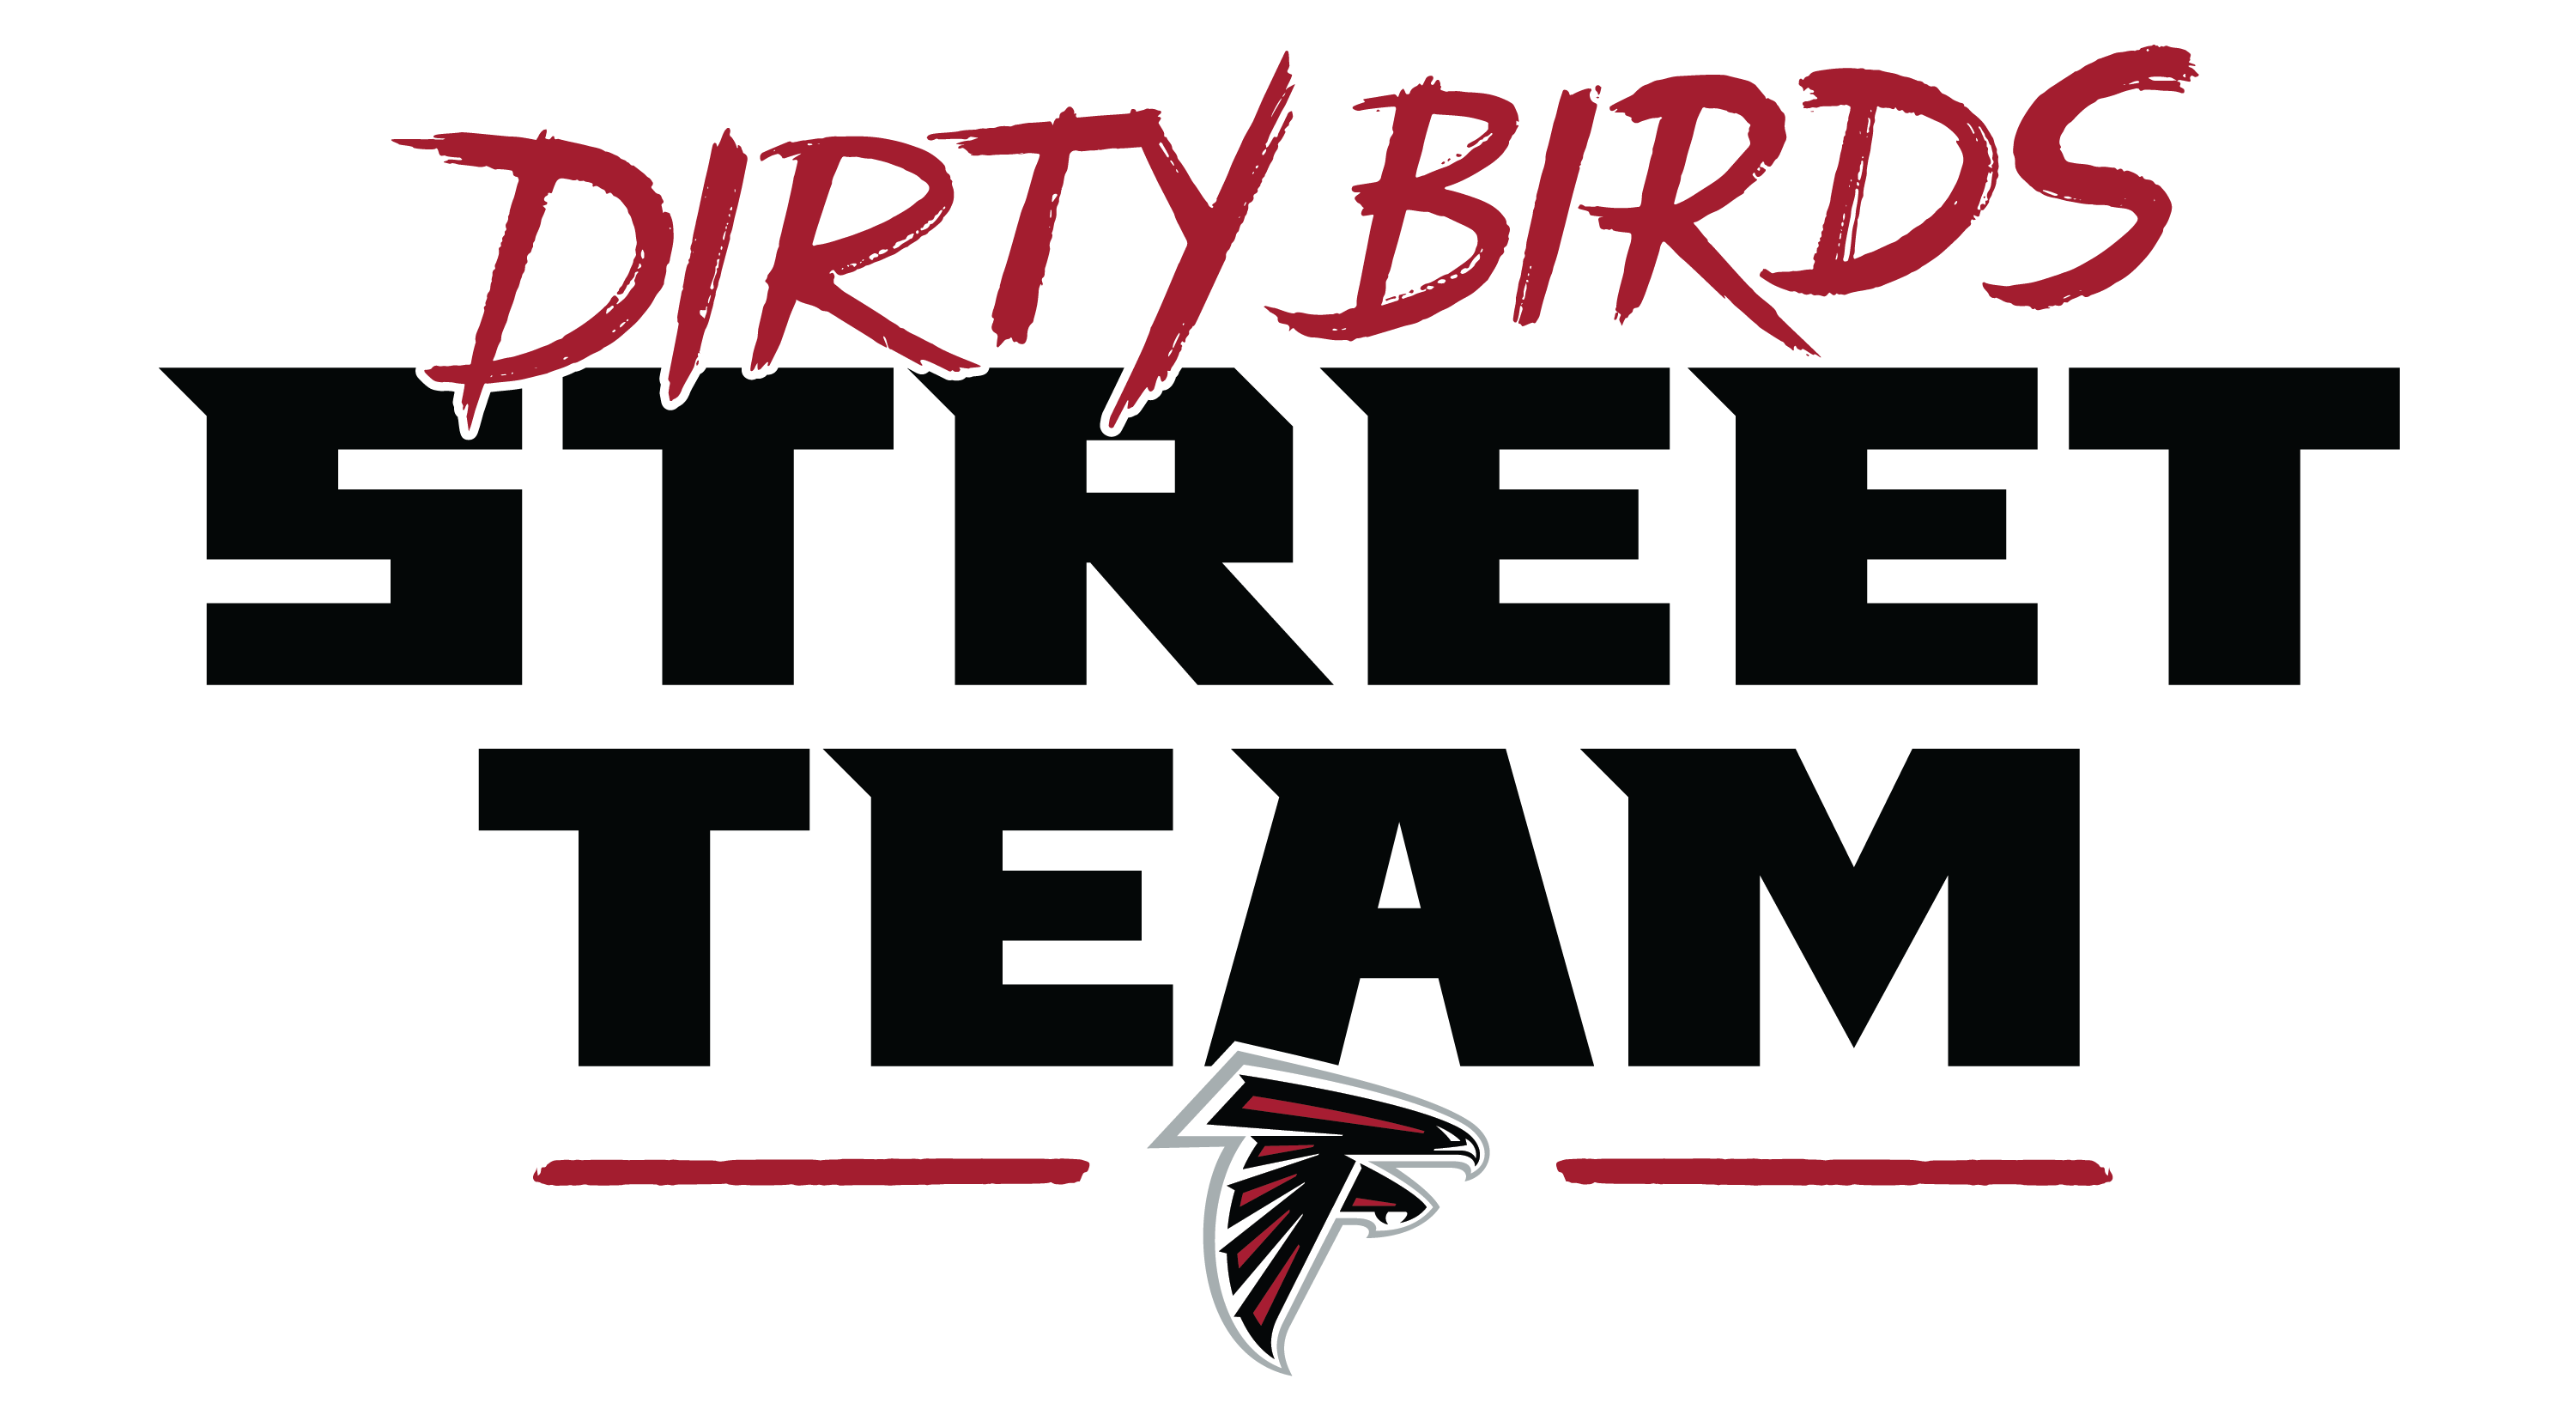 Atlanta Falcons on X: RT for a chance to win a #DirtyBirds